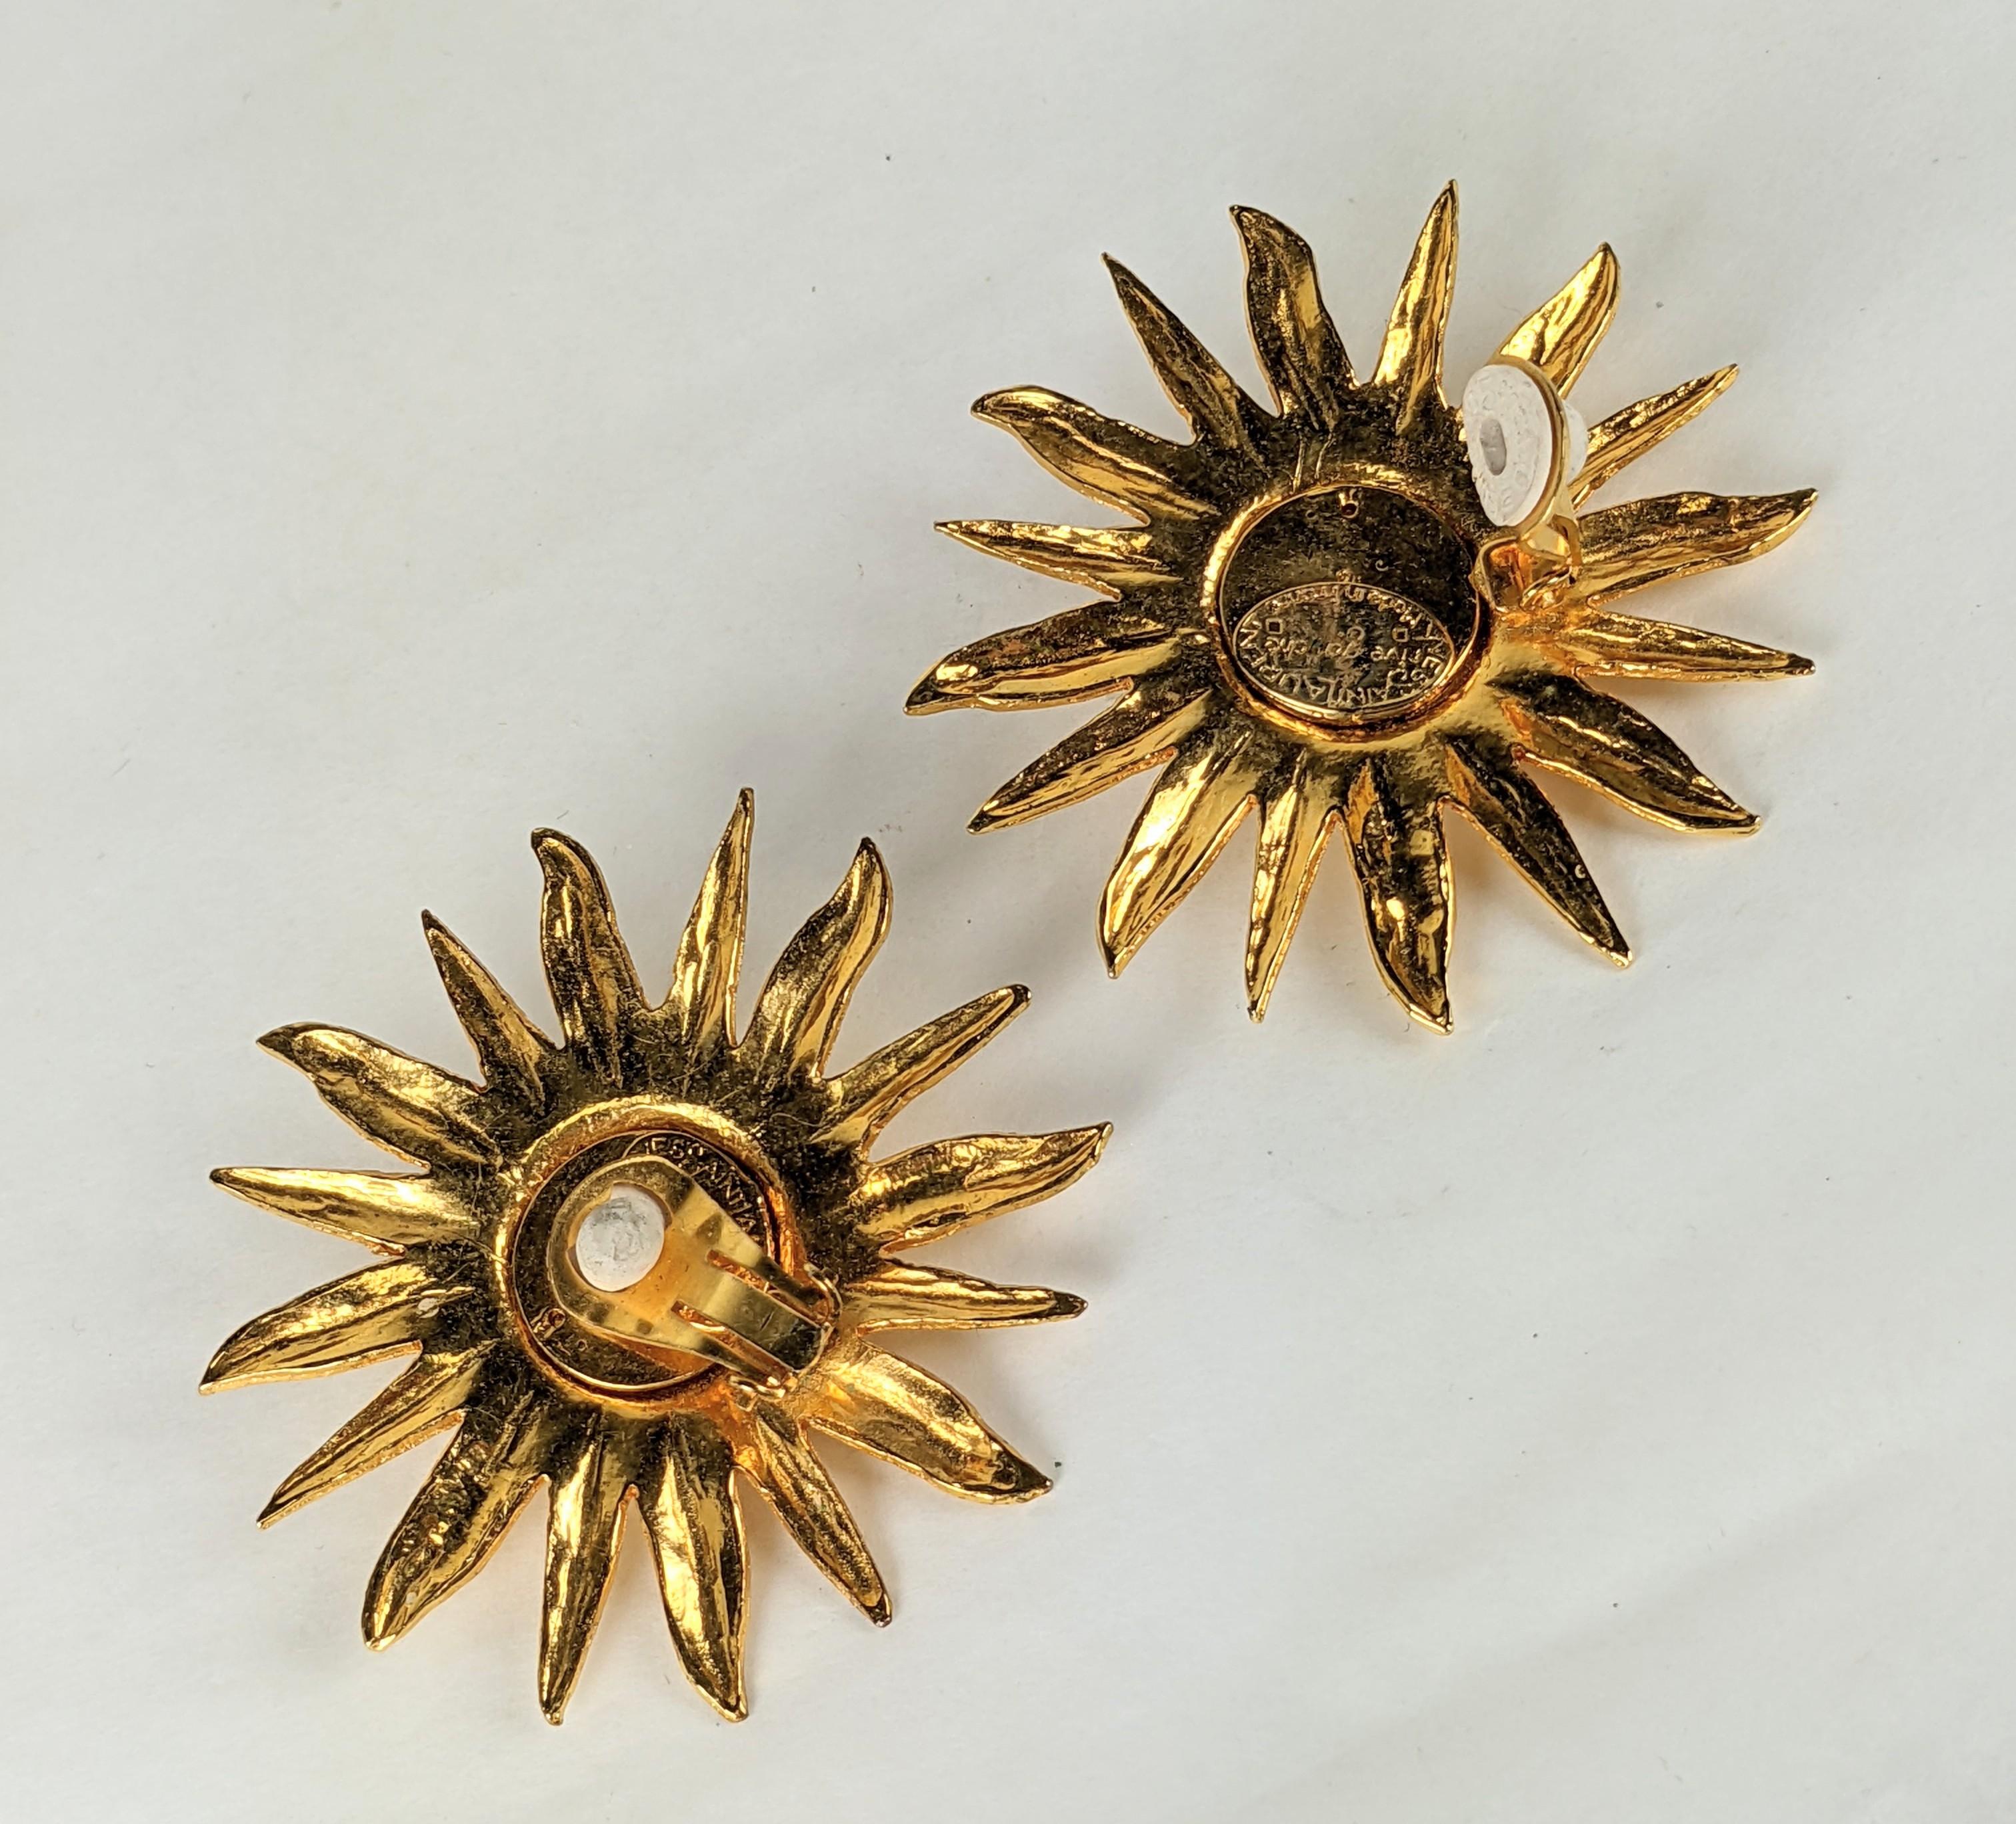 Yves Saint Laurent Hammered Gold Sunburst Earrings In Excellent Condition For Sale In New York, NY